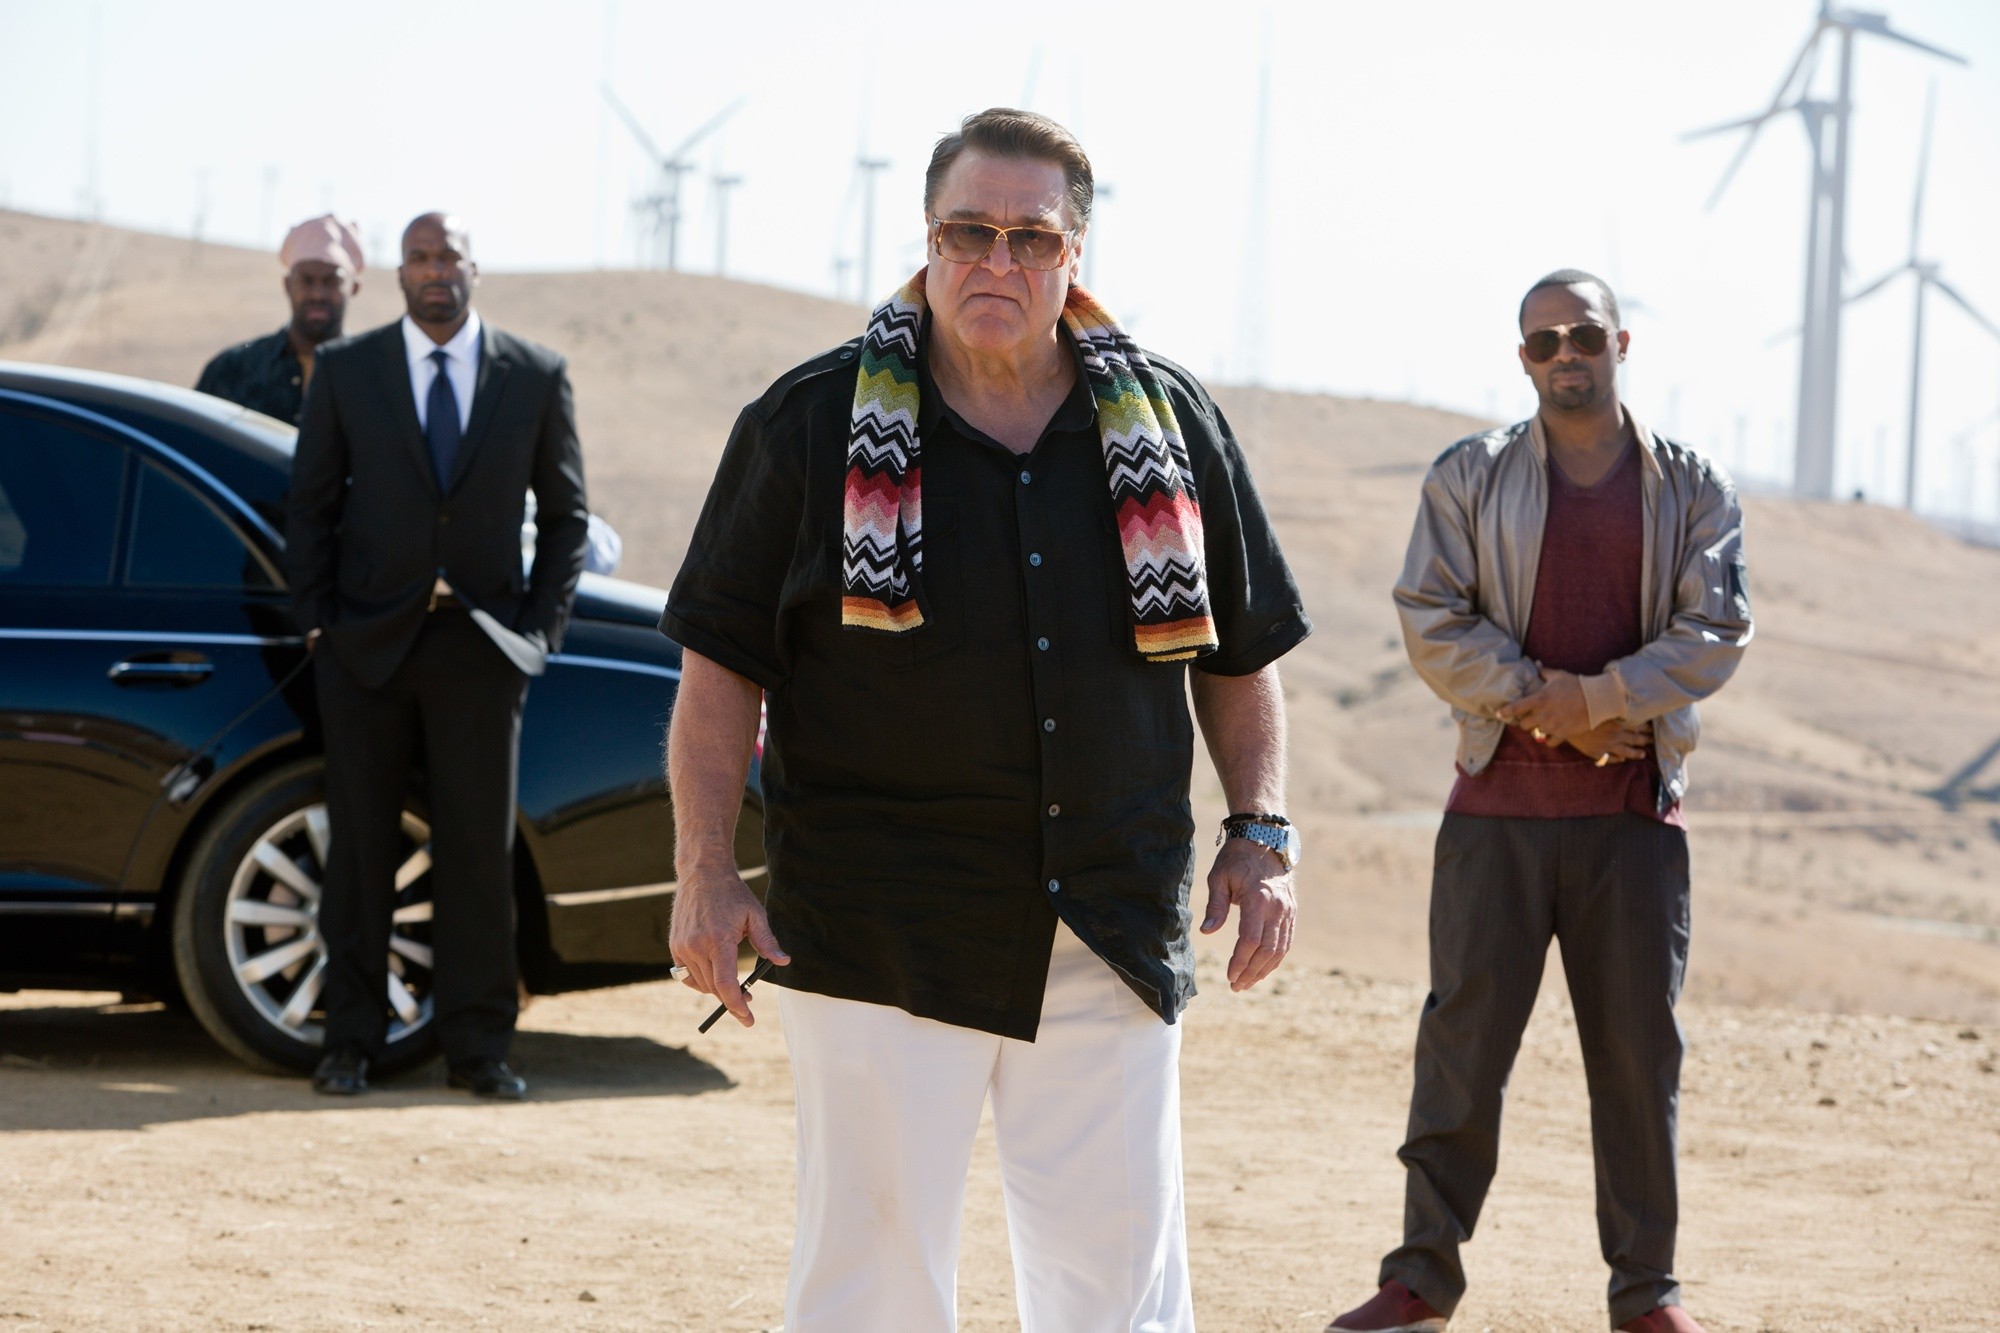 John Goodman stars as Marshall in Warner Bros. Pictures' The Hangover Part III (2013)